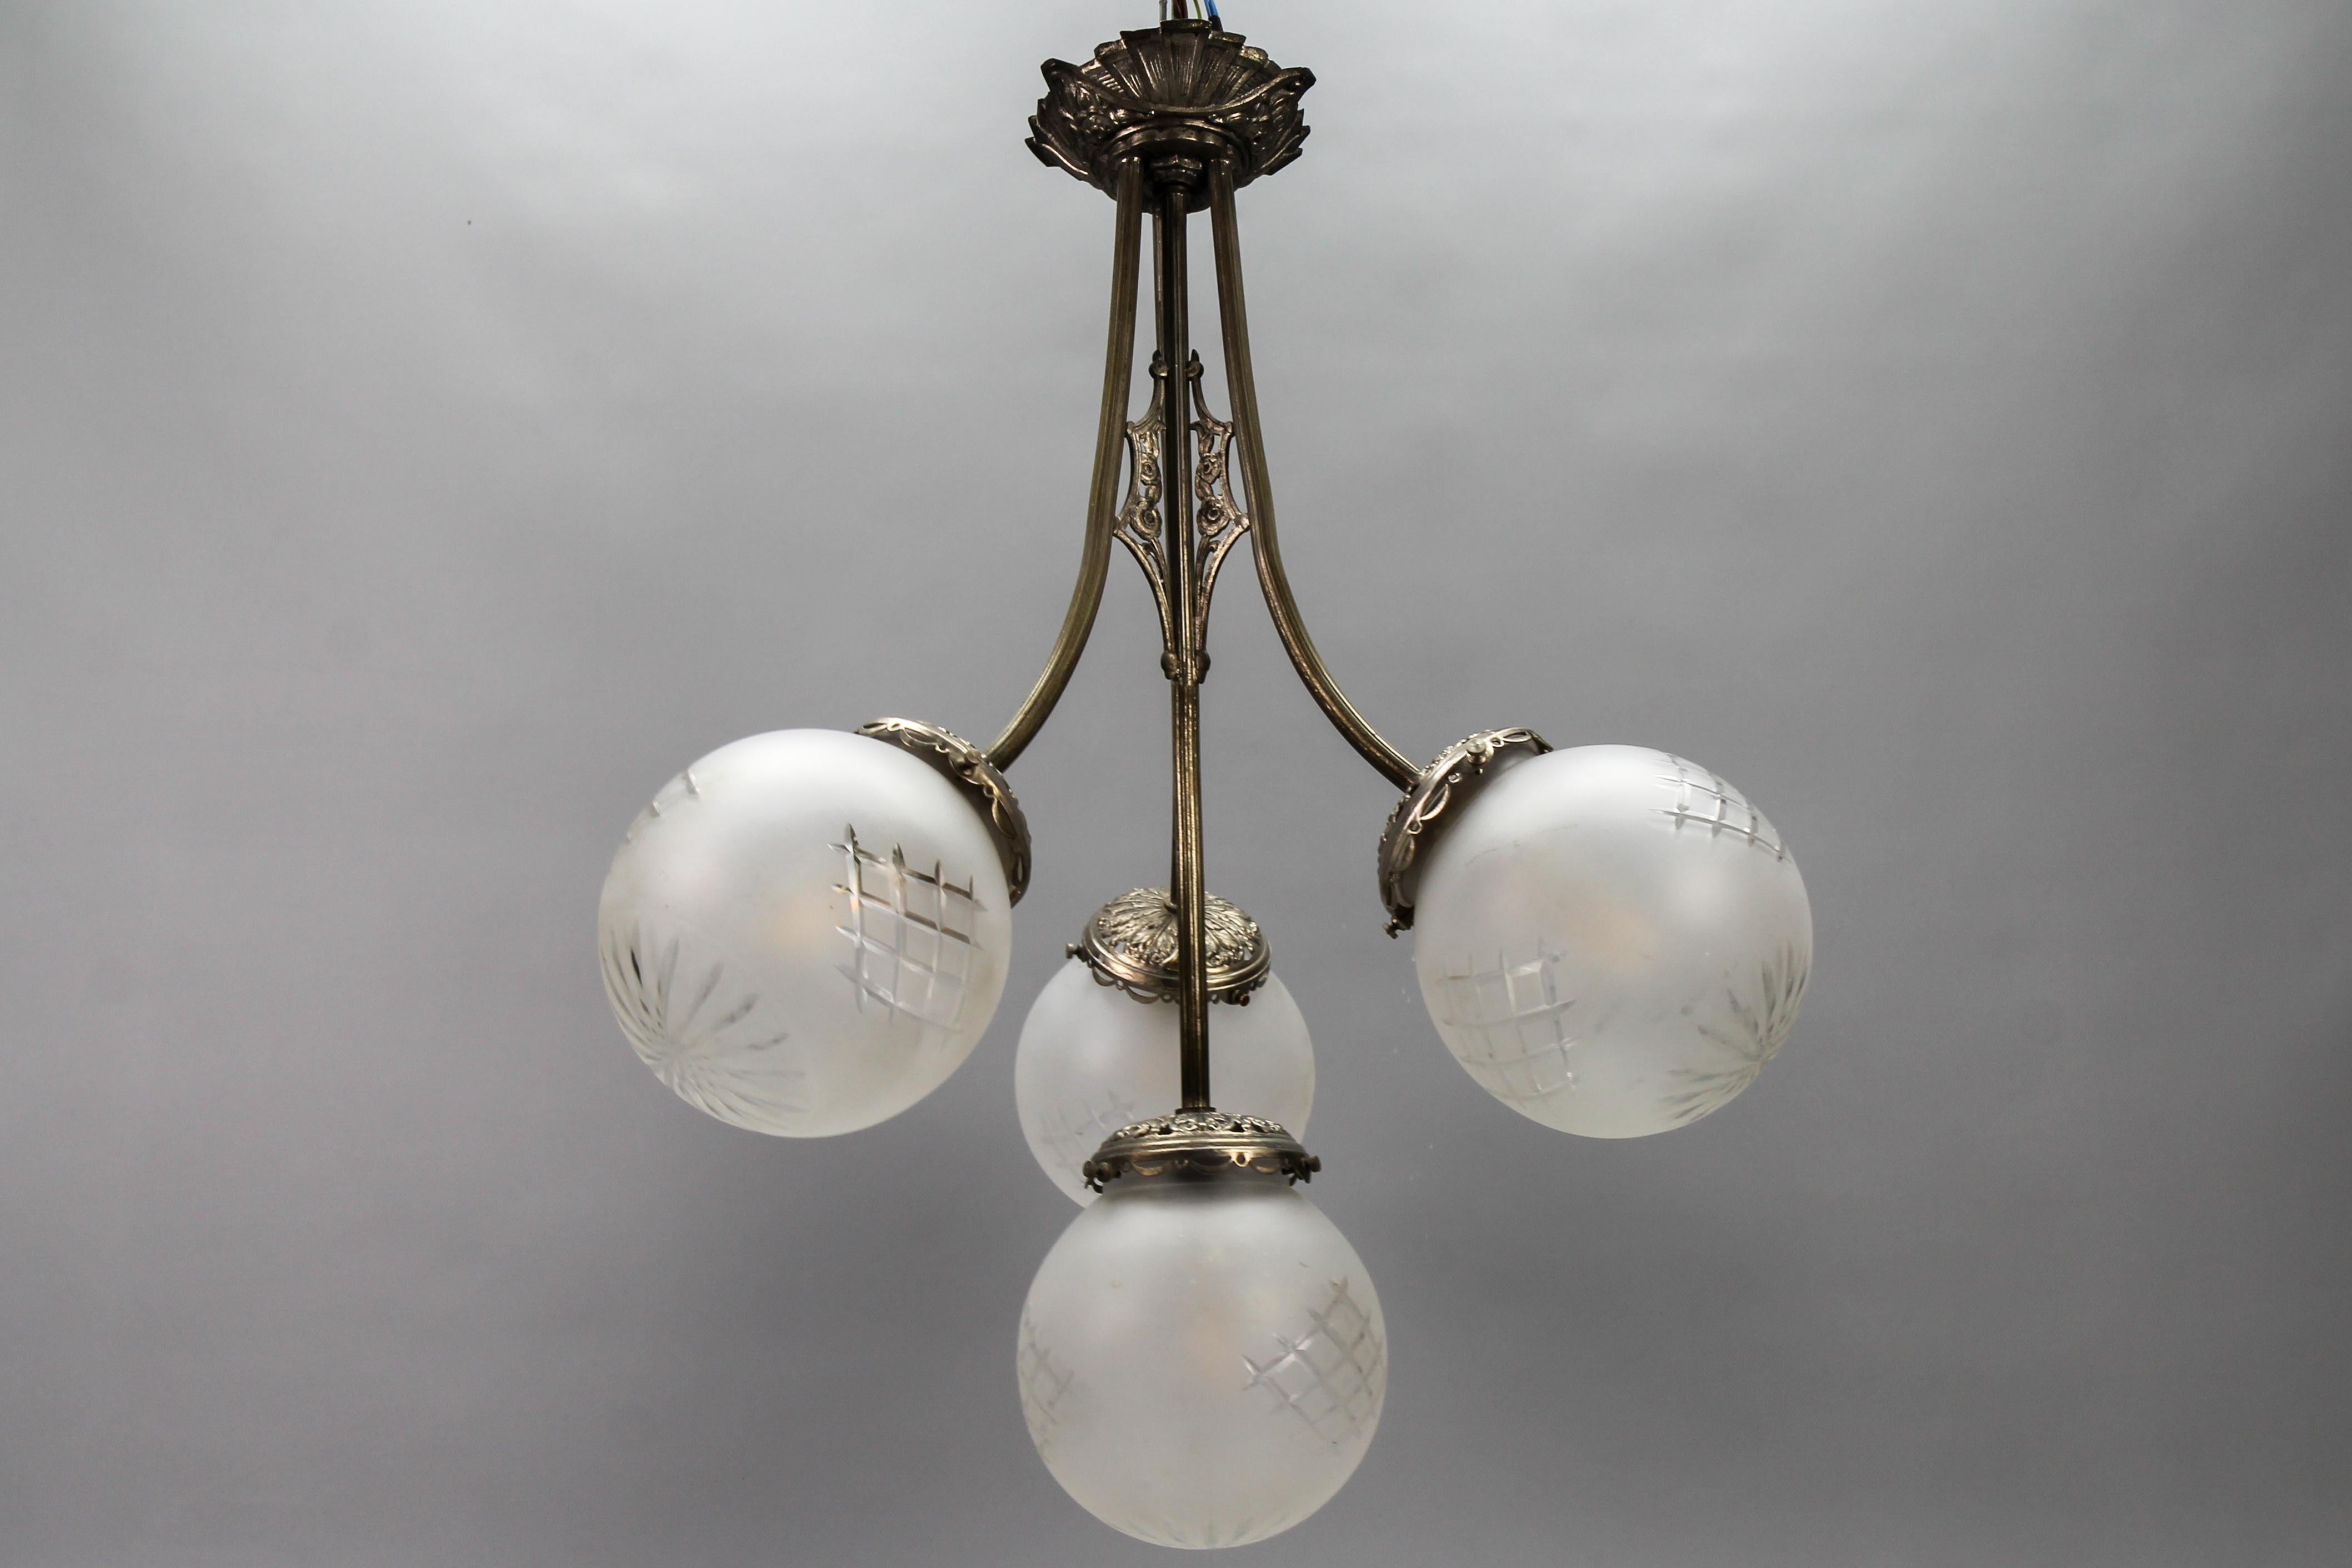 French Art Deco four-light brass and frosted cut glass globes pendant chandelier from circa the 1930s.
This elegant French Art Deco pendant chandelier features a brass light fixture ornate with Art Deco motifs and stylized flowers and four arms each